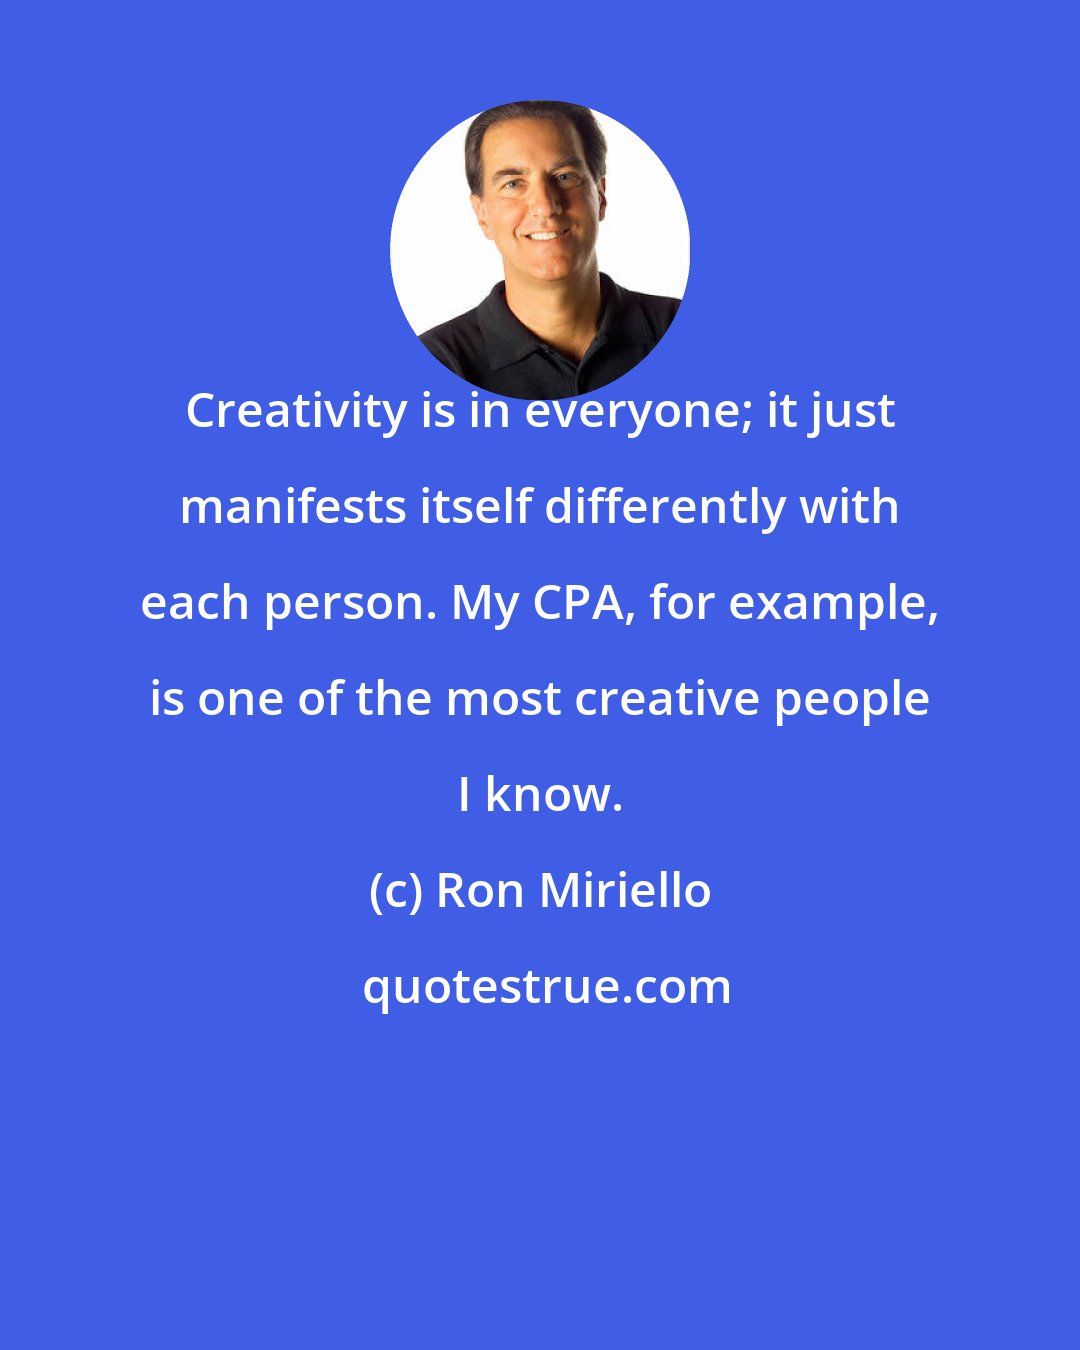 Ron Miriello: Creativity is in everyone; it just manifests itself differently with each person. My CPA, for example, is one of the most creative people I know.